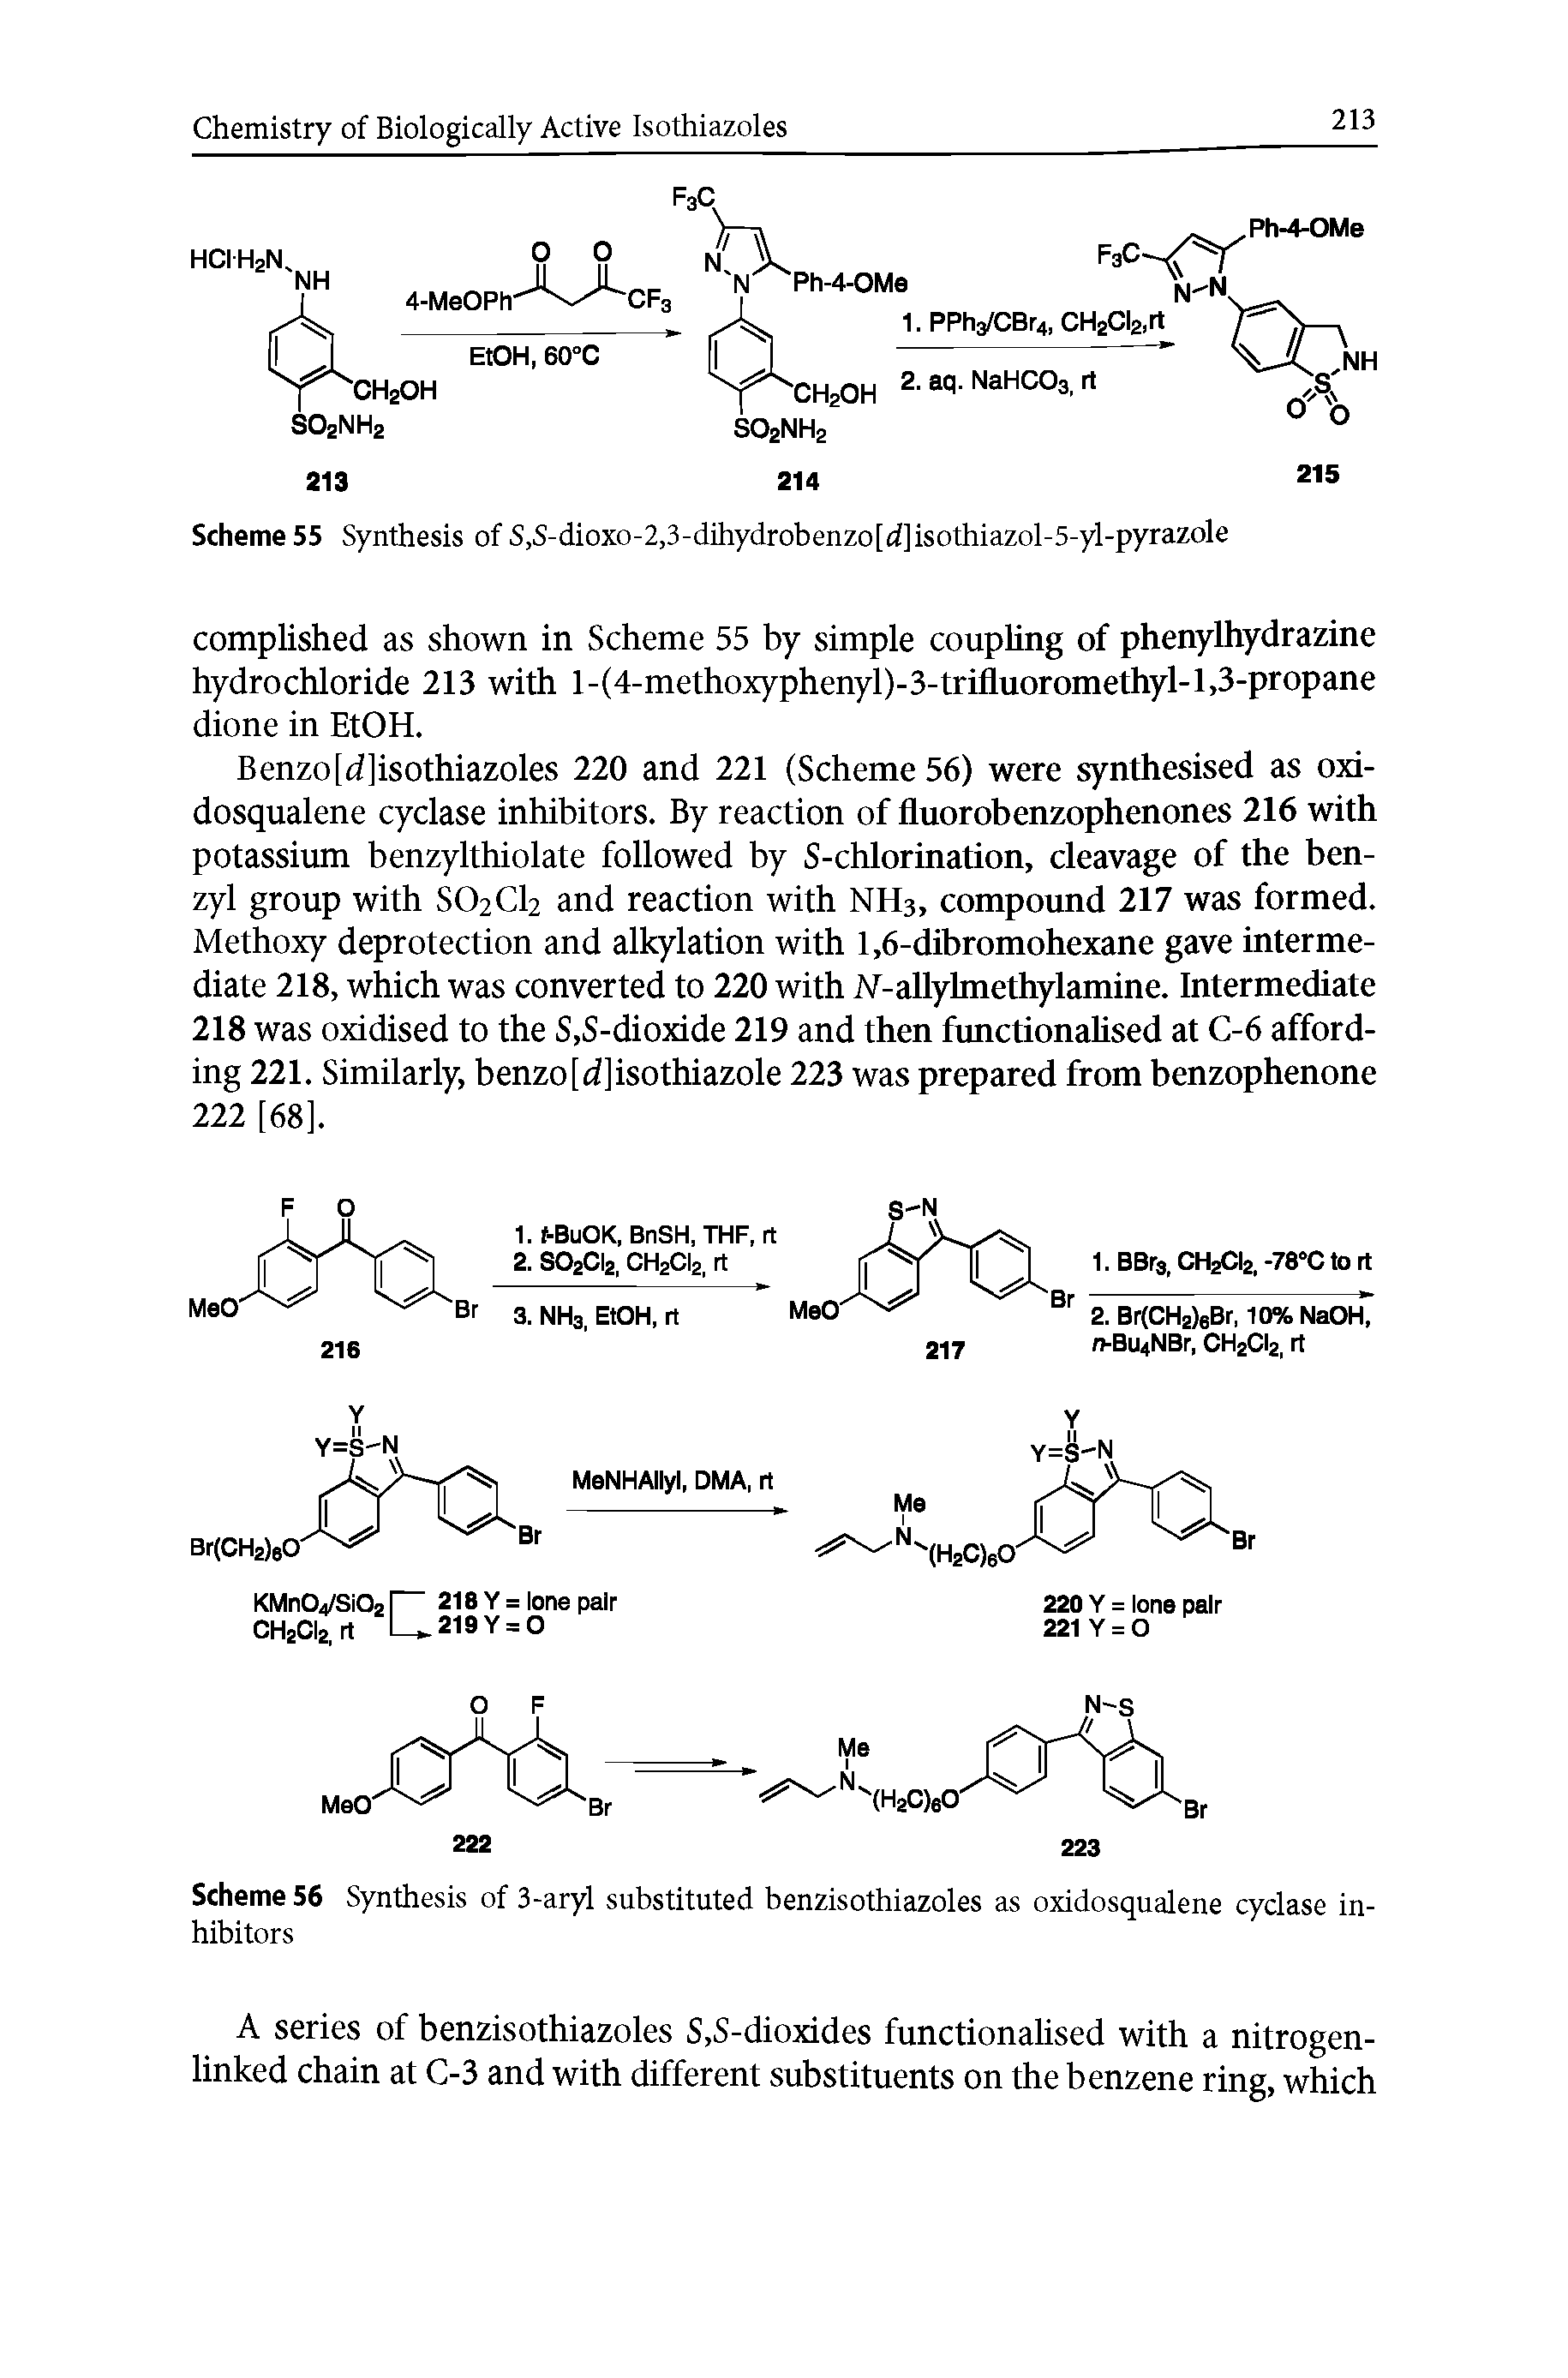 Scheme 56 Synthesis of 3-aryl substituted benzisothiazoles as oxidosqualene cyclase inhibitors...